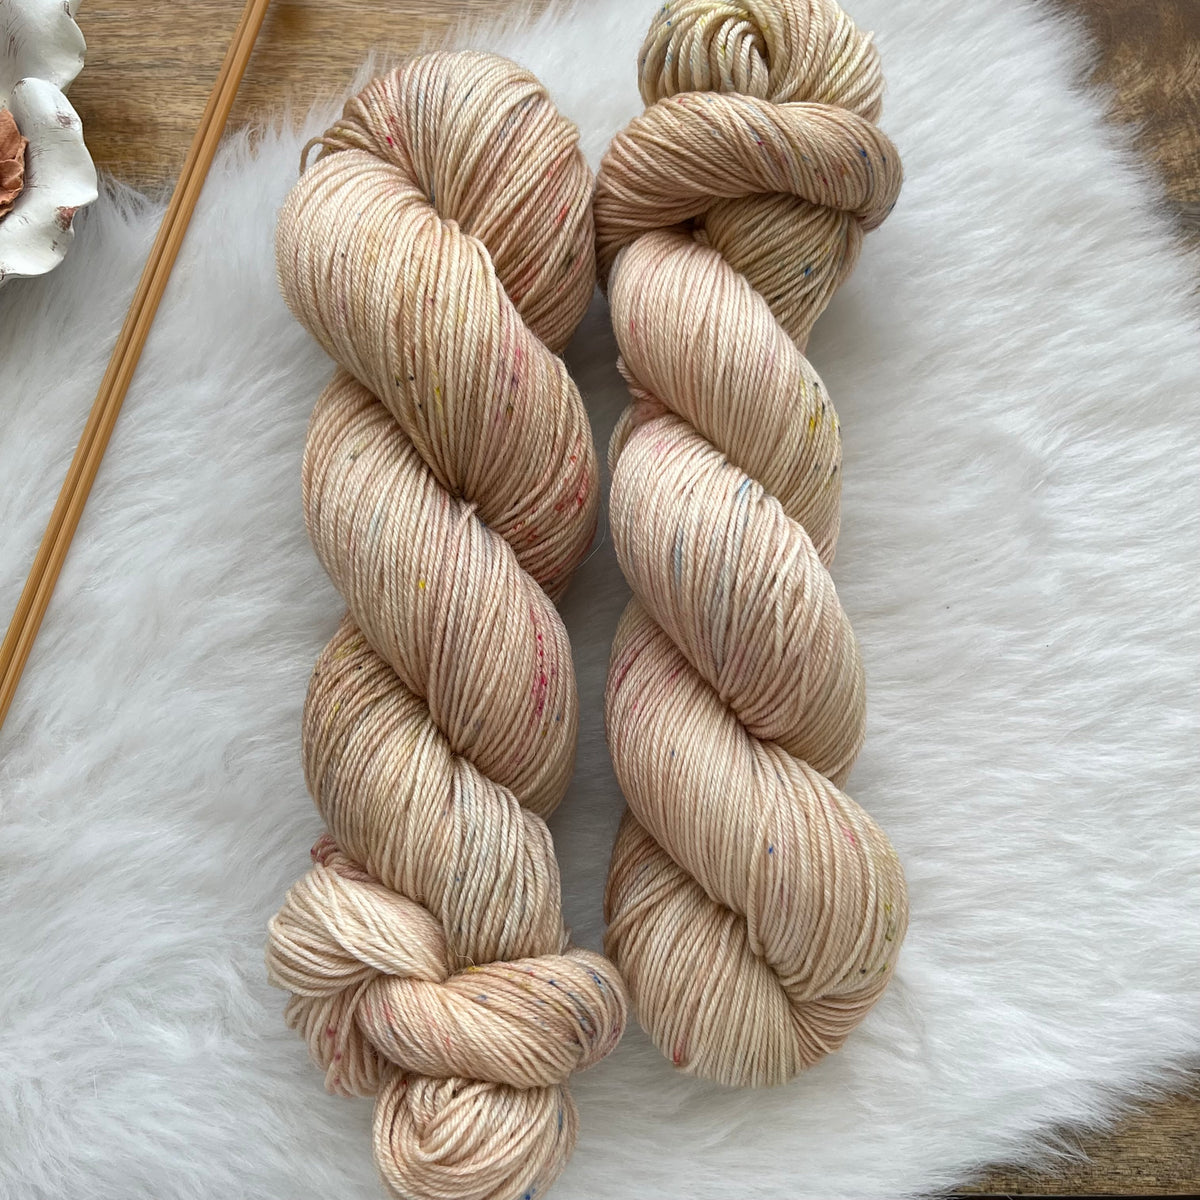 OLD BROWN   -Ready to Ship - BFL Sock- Hand Dyed Yarn Skein